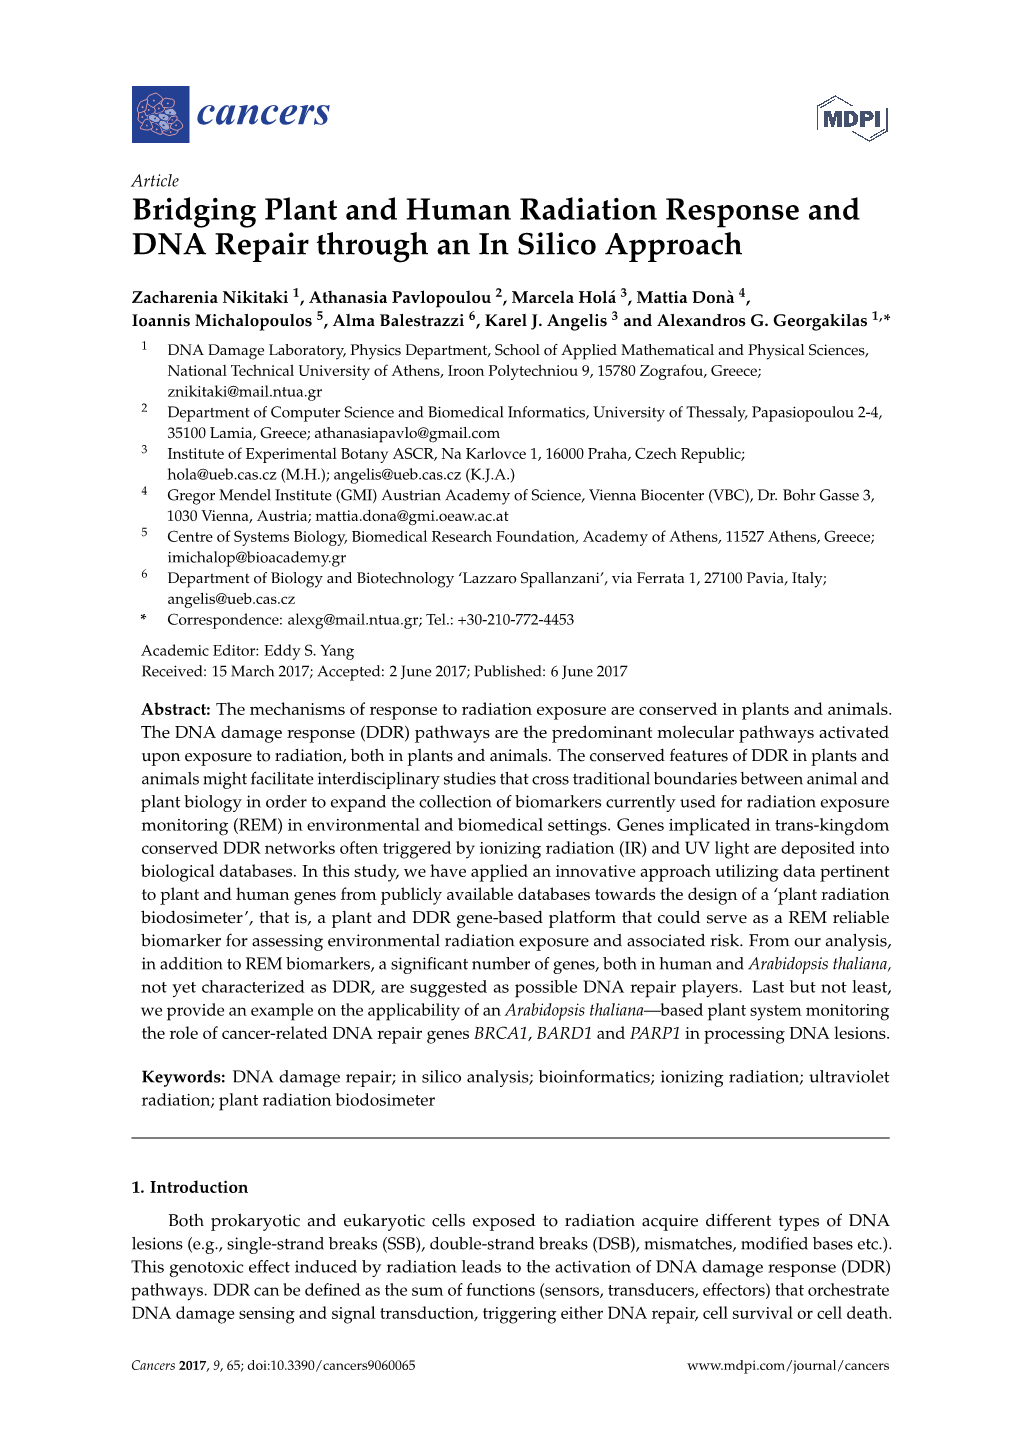 Bridging Plant and Human Radiation Response and DNA Repair Through an in Silico Approach